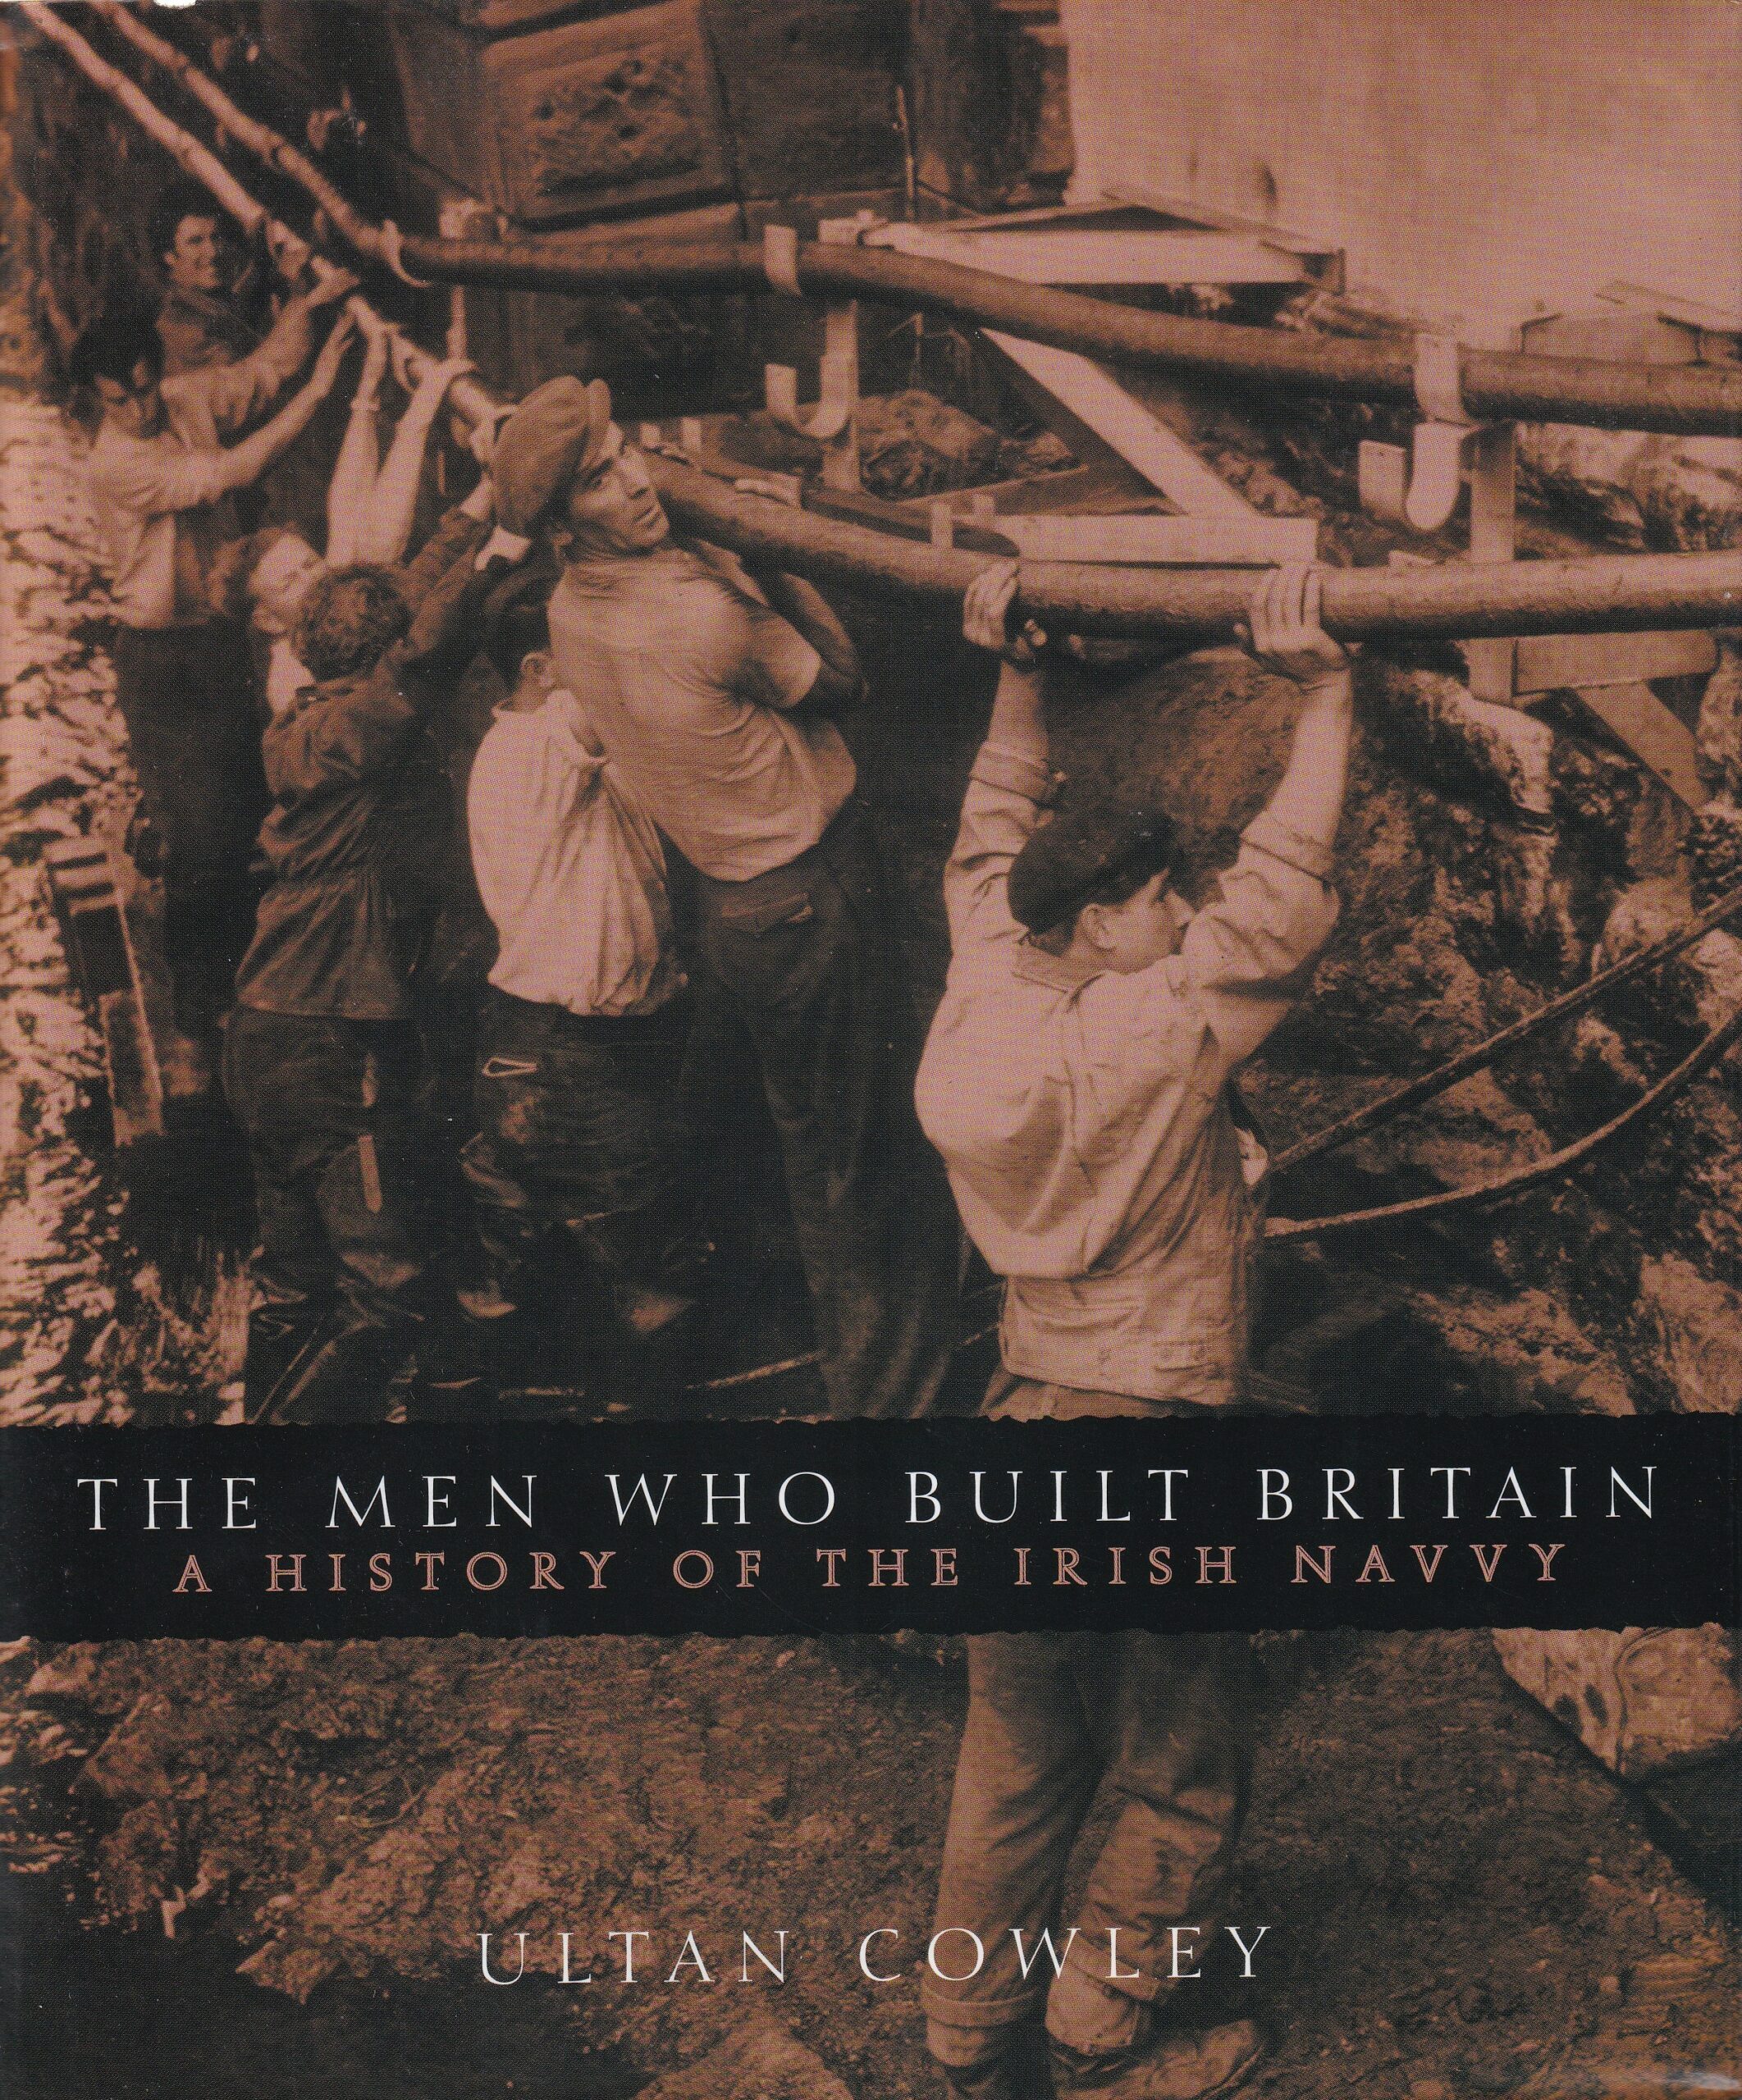 The Men Who Built Britain: A History of the Irish Navvy by Ultan Cowley